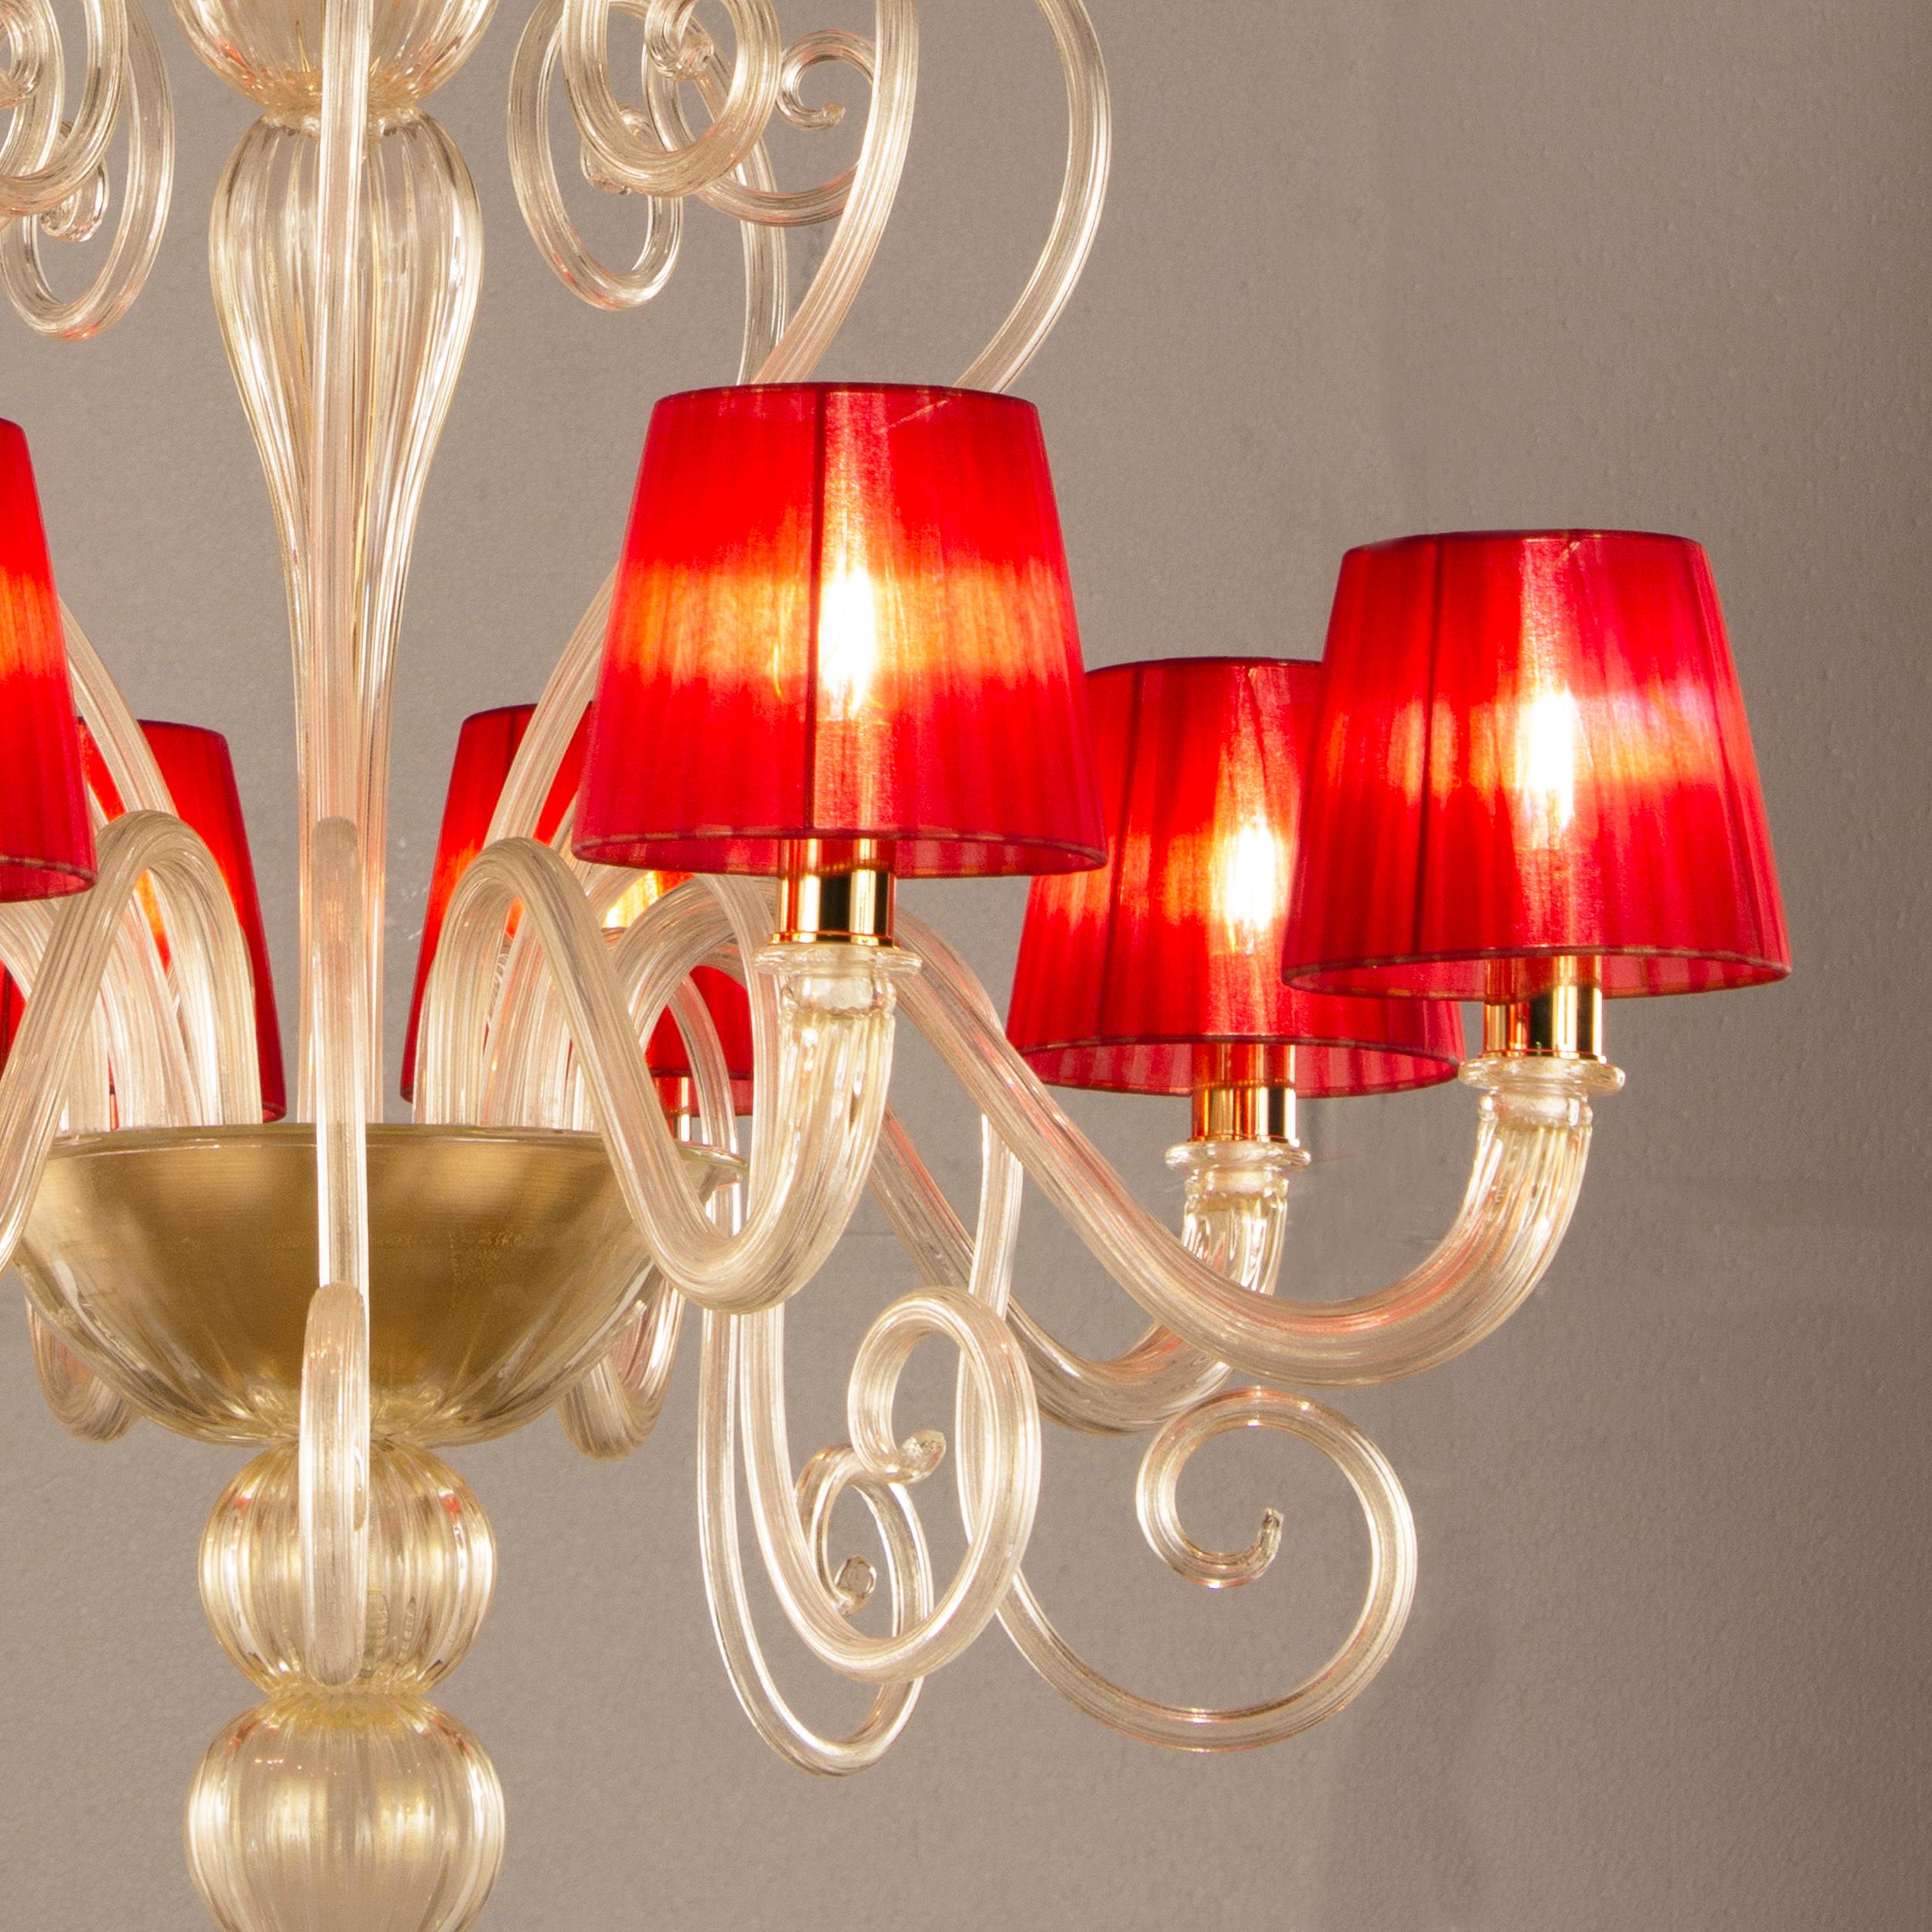 Artistic Chandelier 8 Arms Golden Leaf Murano Glass and Lampshades by Multiforme In New Condition For Sale In Trebaseleghe, IT